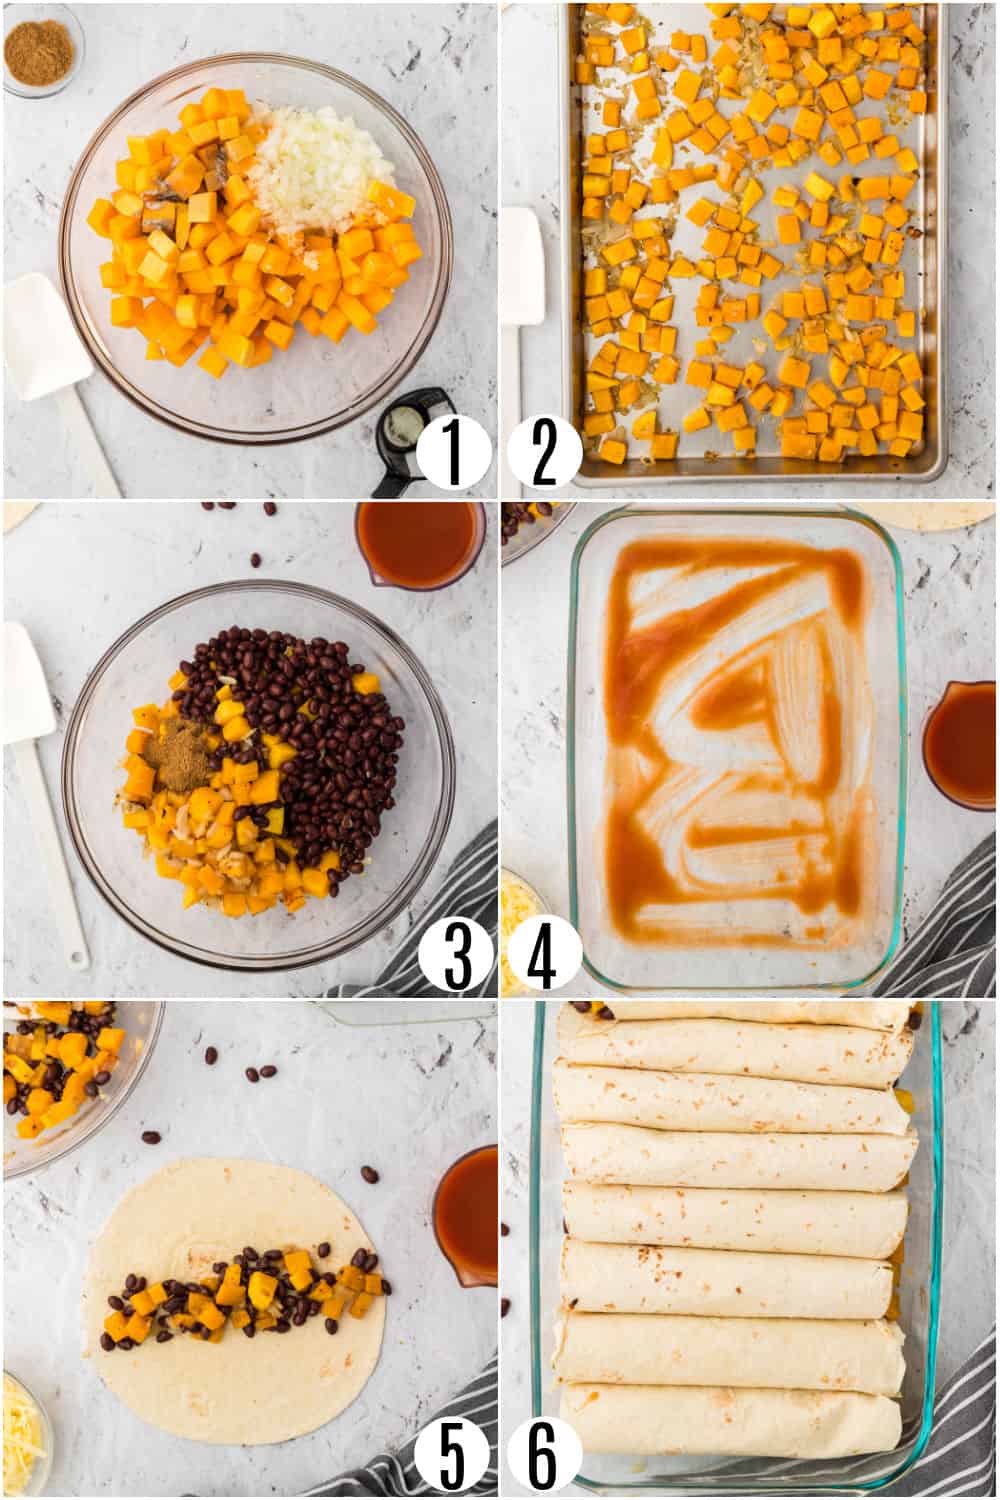 Step by step photos showing how to make butternut squash enchiladas.